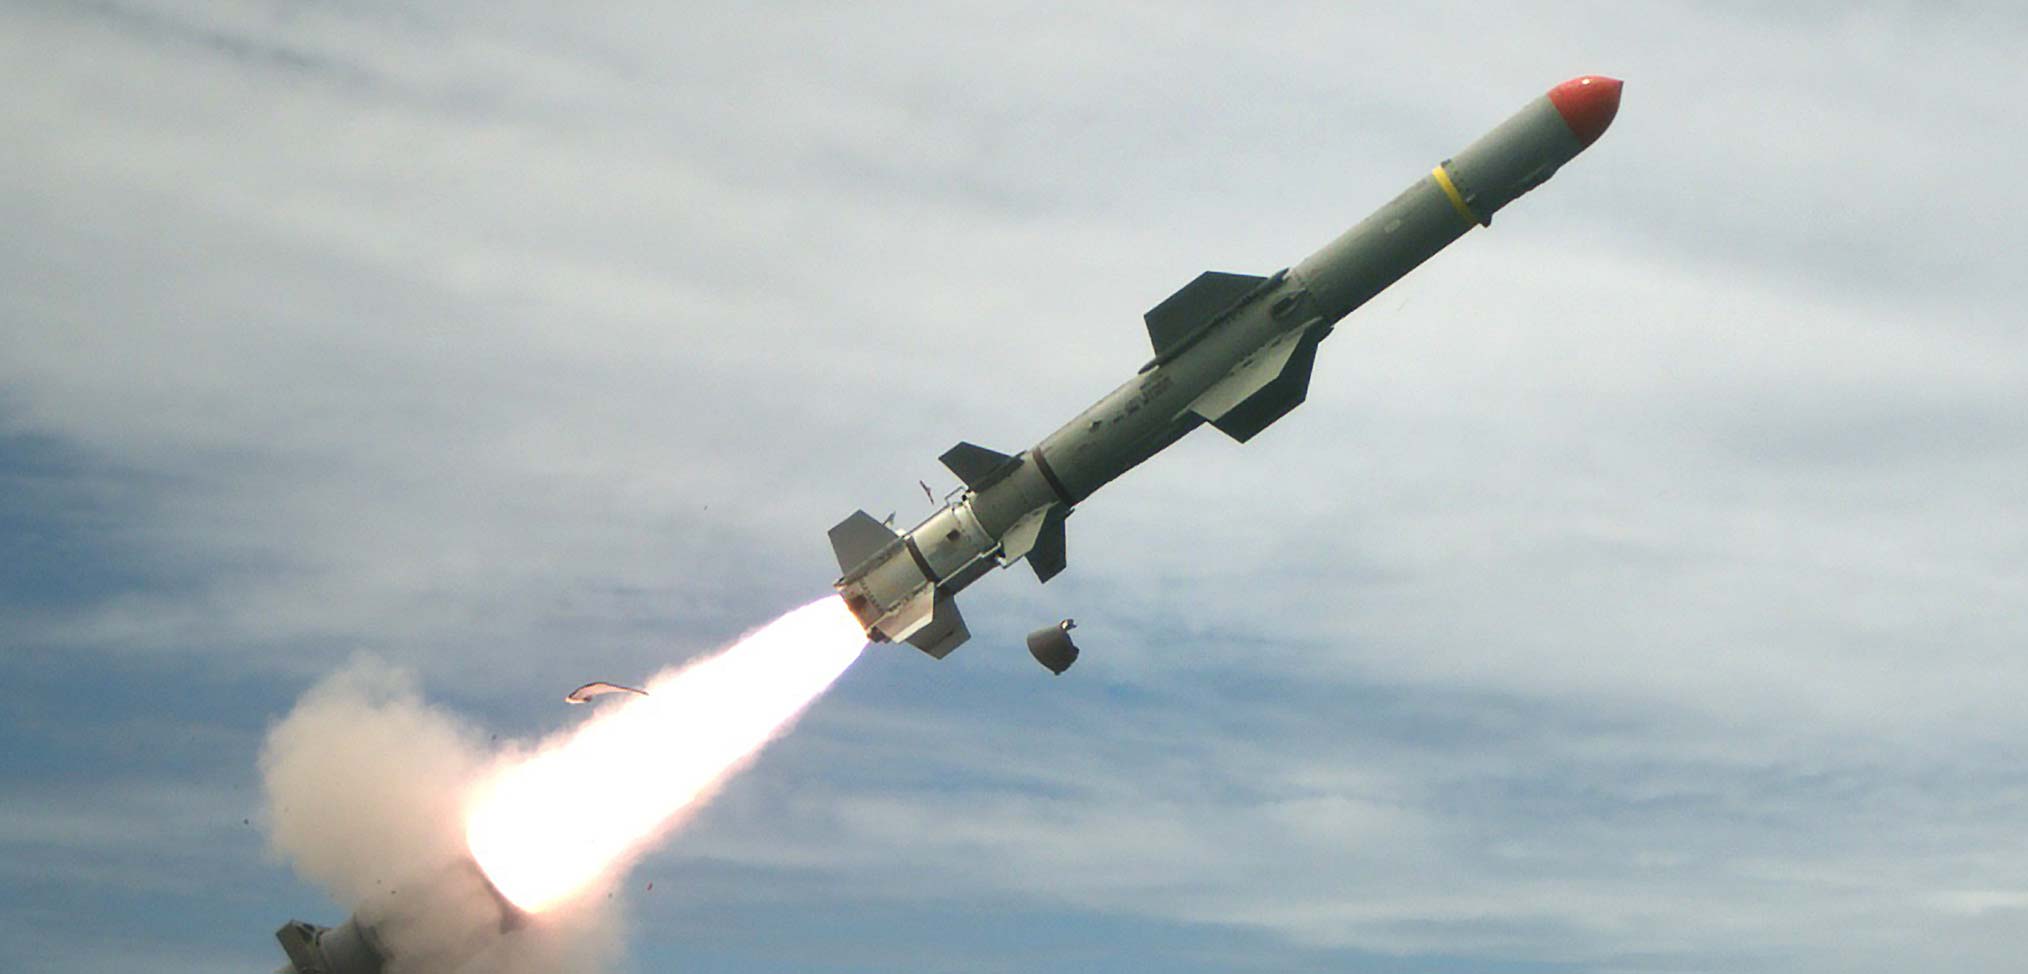 Can the UK supply anti-ship missiles to Ukraine?